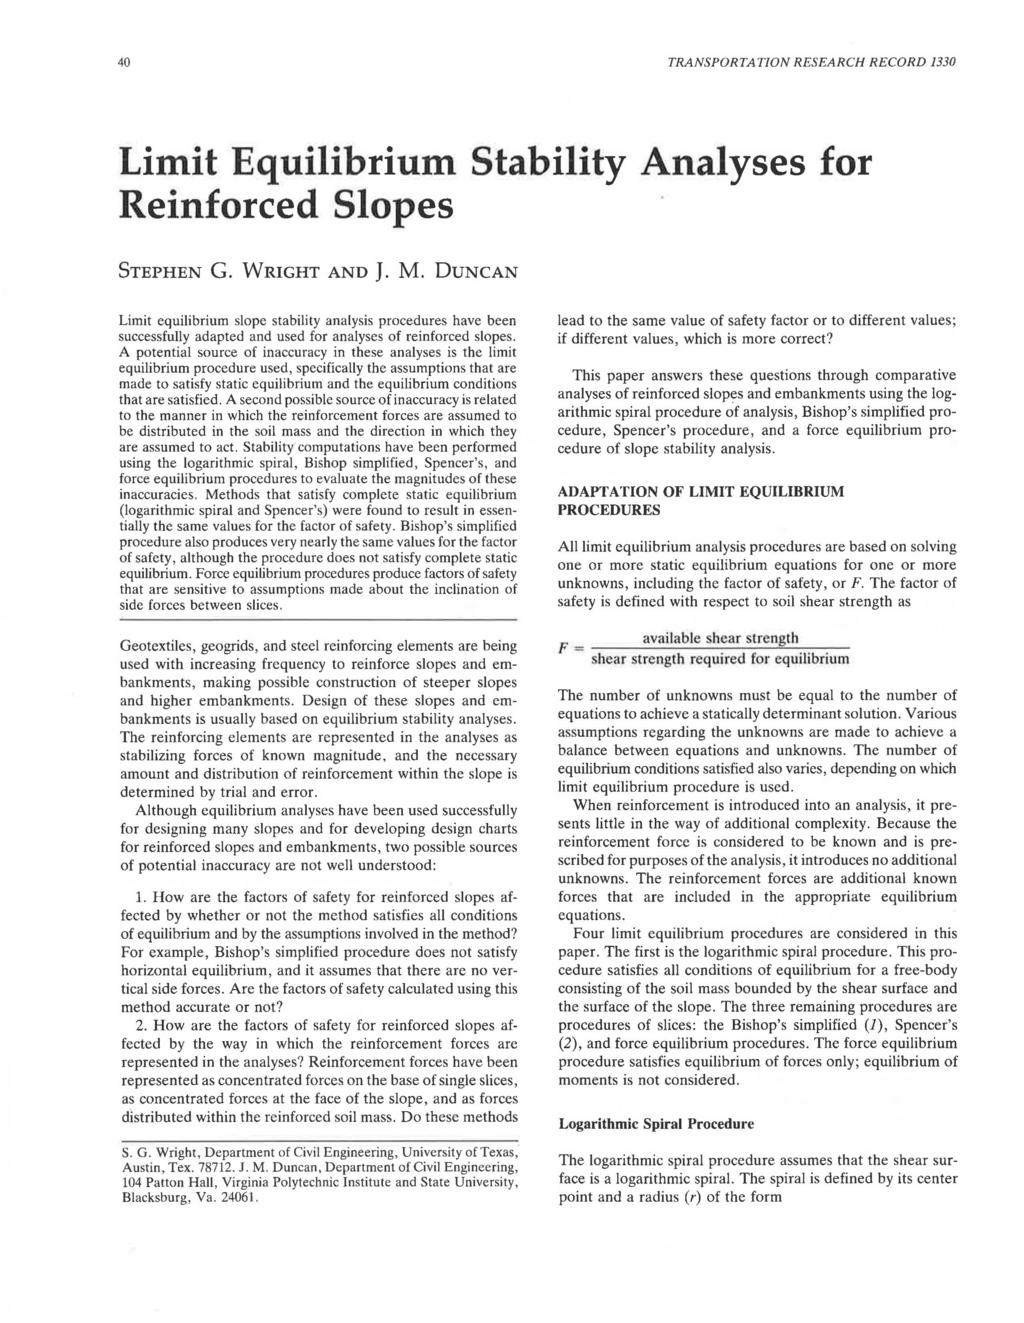 40 TRANSPORTATION RESEARCH RECORD 1330 Limit Equilibrium Stability Analyses for Reinforced Slopes STEPHEN G. WRIGHT AND J.M.